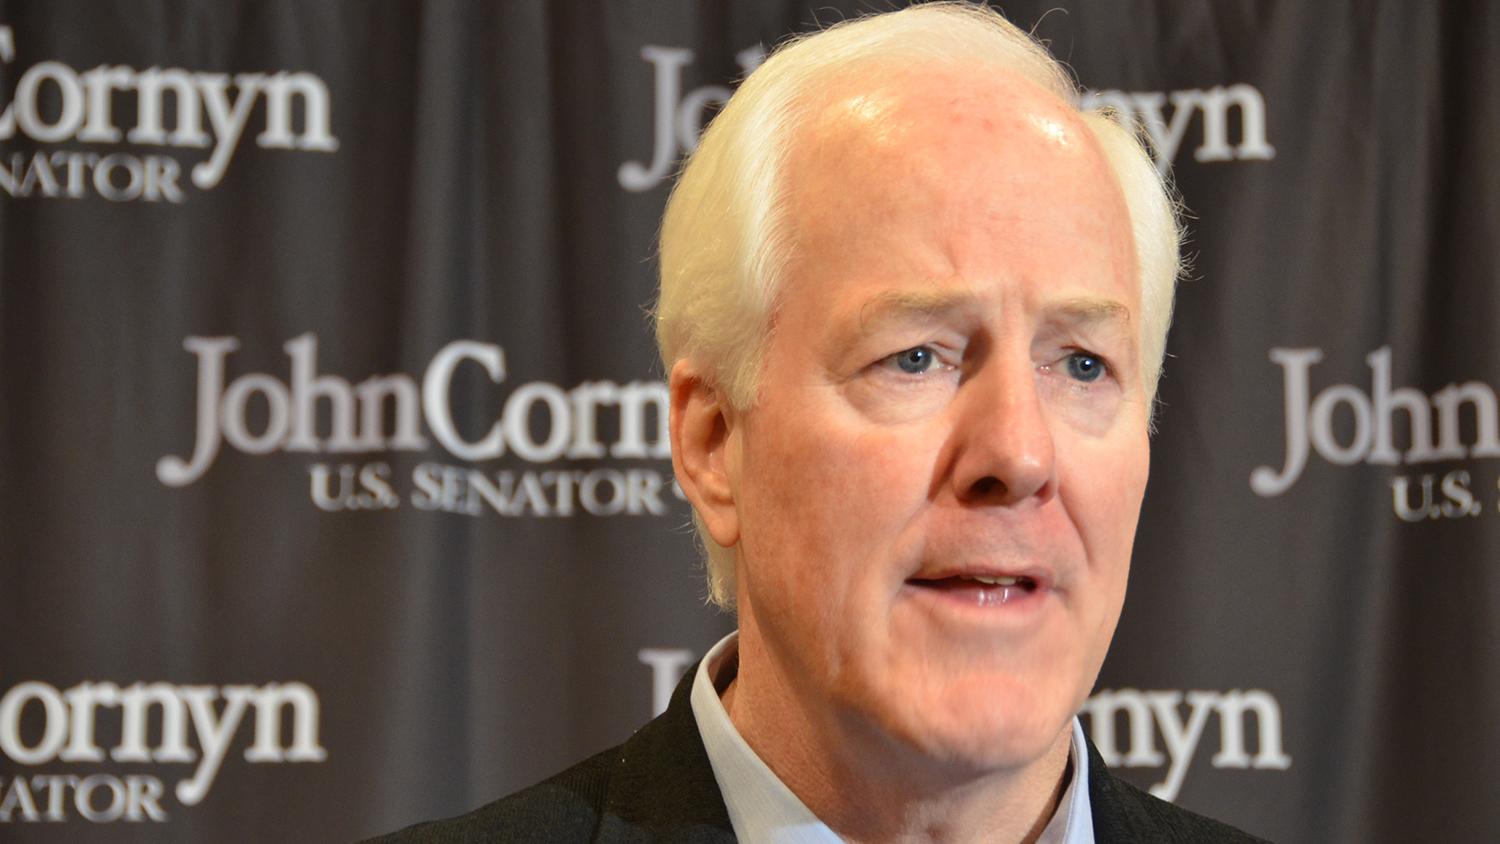 Image result for photos of John Cornyn